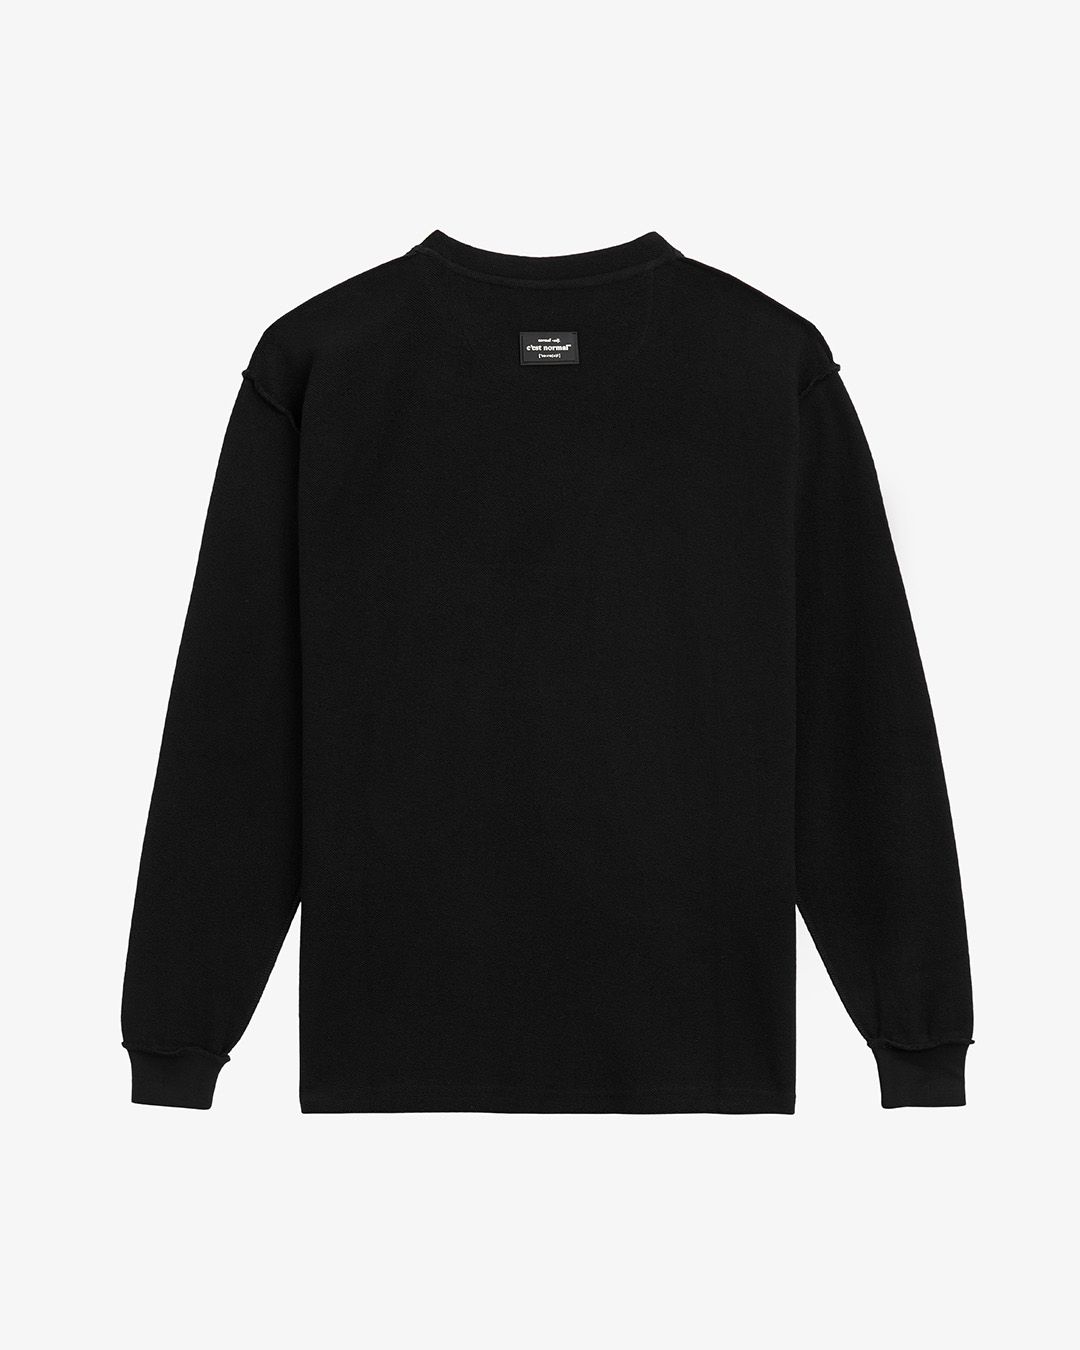 The Inside Out Long Sleeve T-Shirt | c'est normal - Around here.